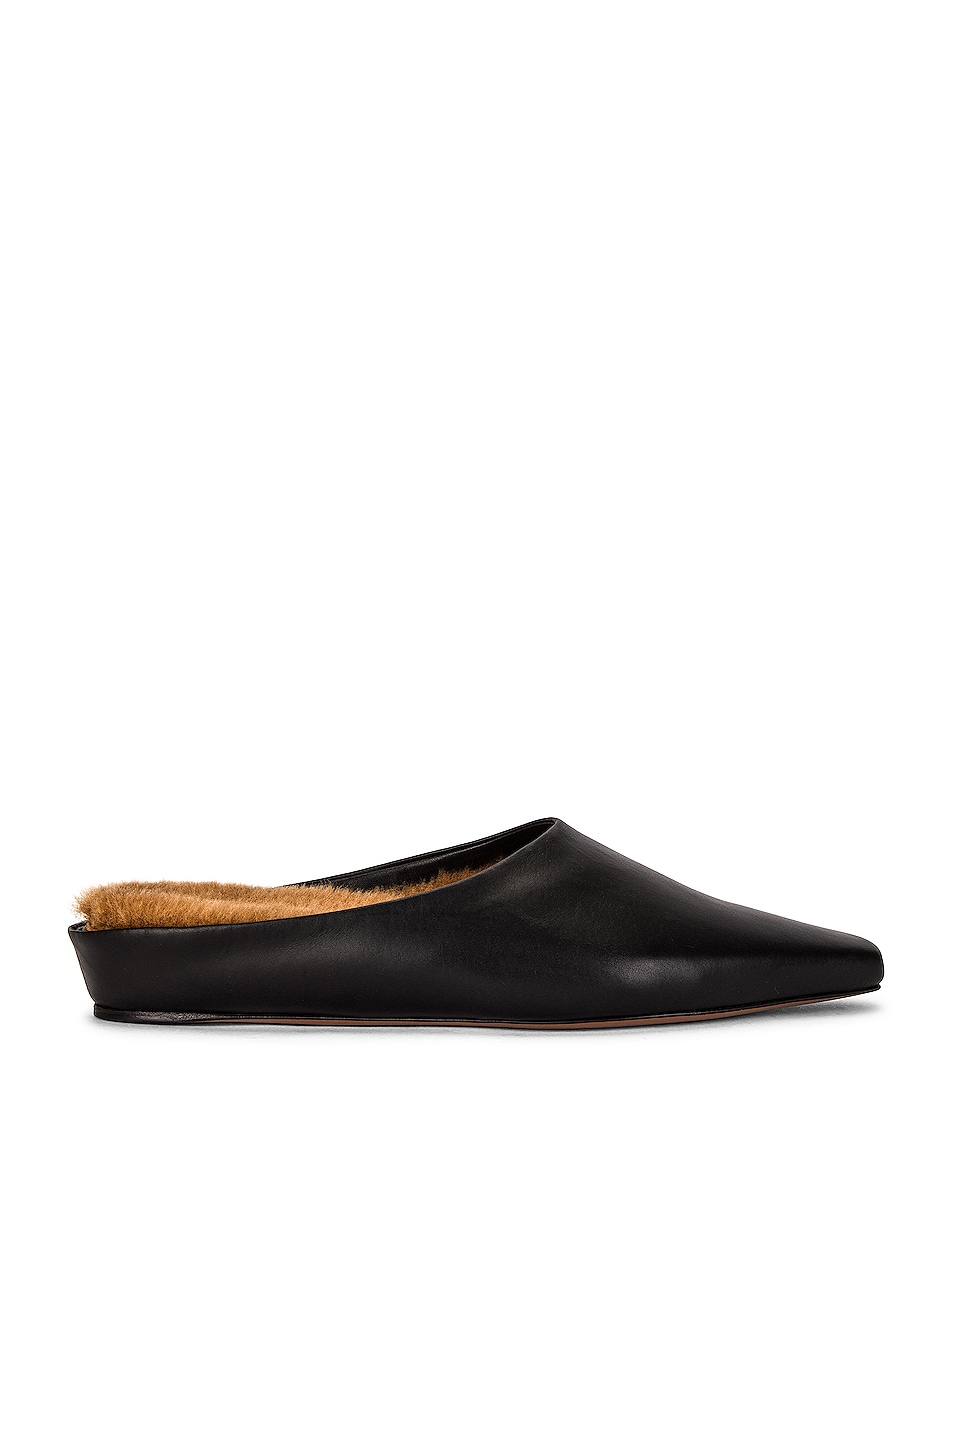 Image 1 of Neous Alba Shearling Leather Mule in Black